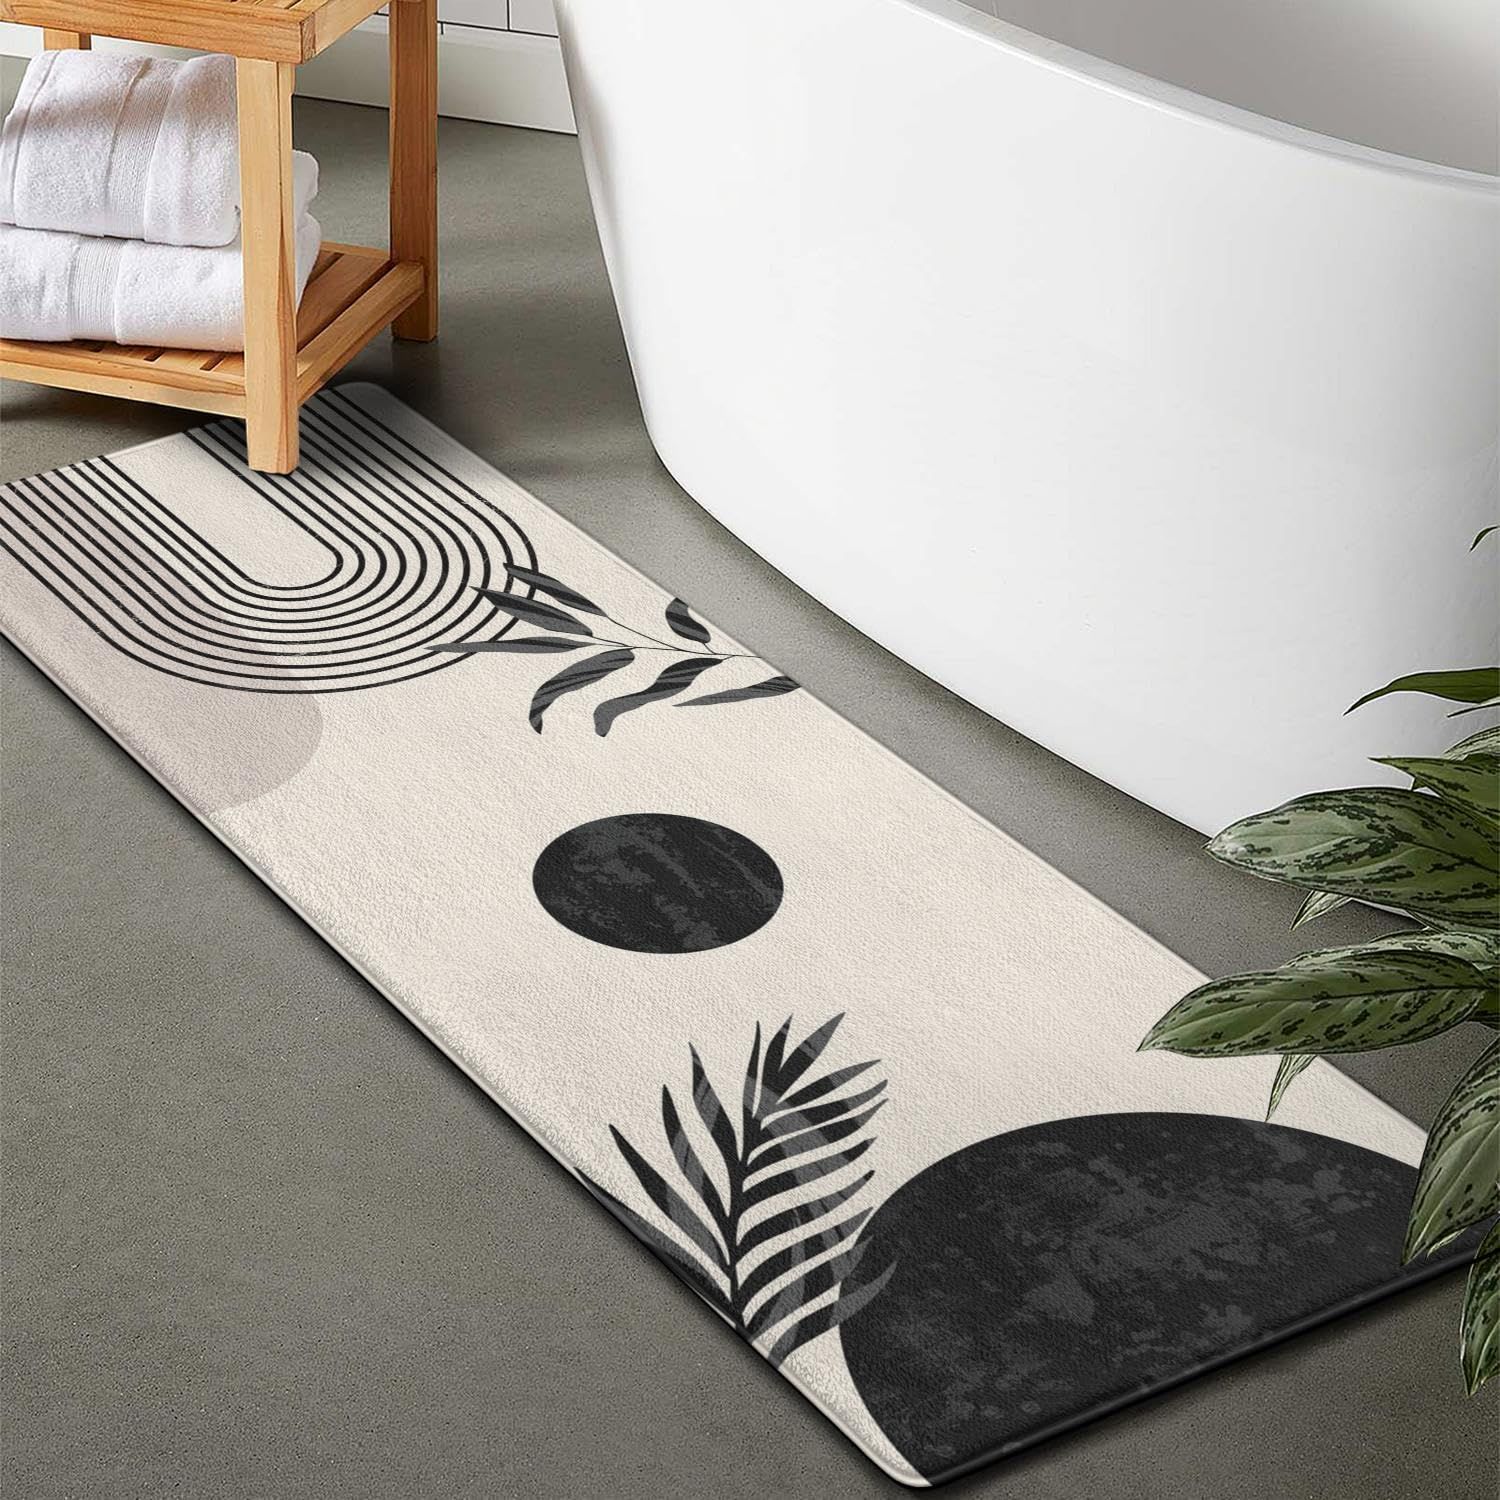 Upgrade Your Bathroom with Stylish and Functional Decorative Large Bathroom Rugs